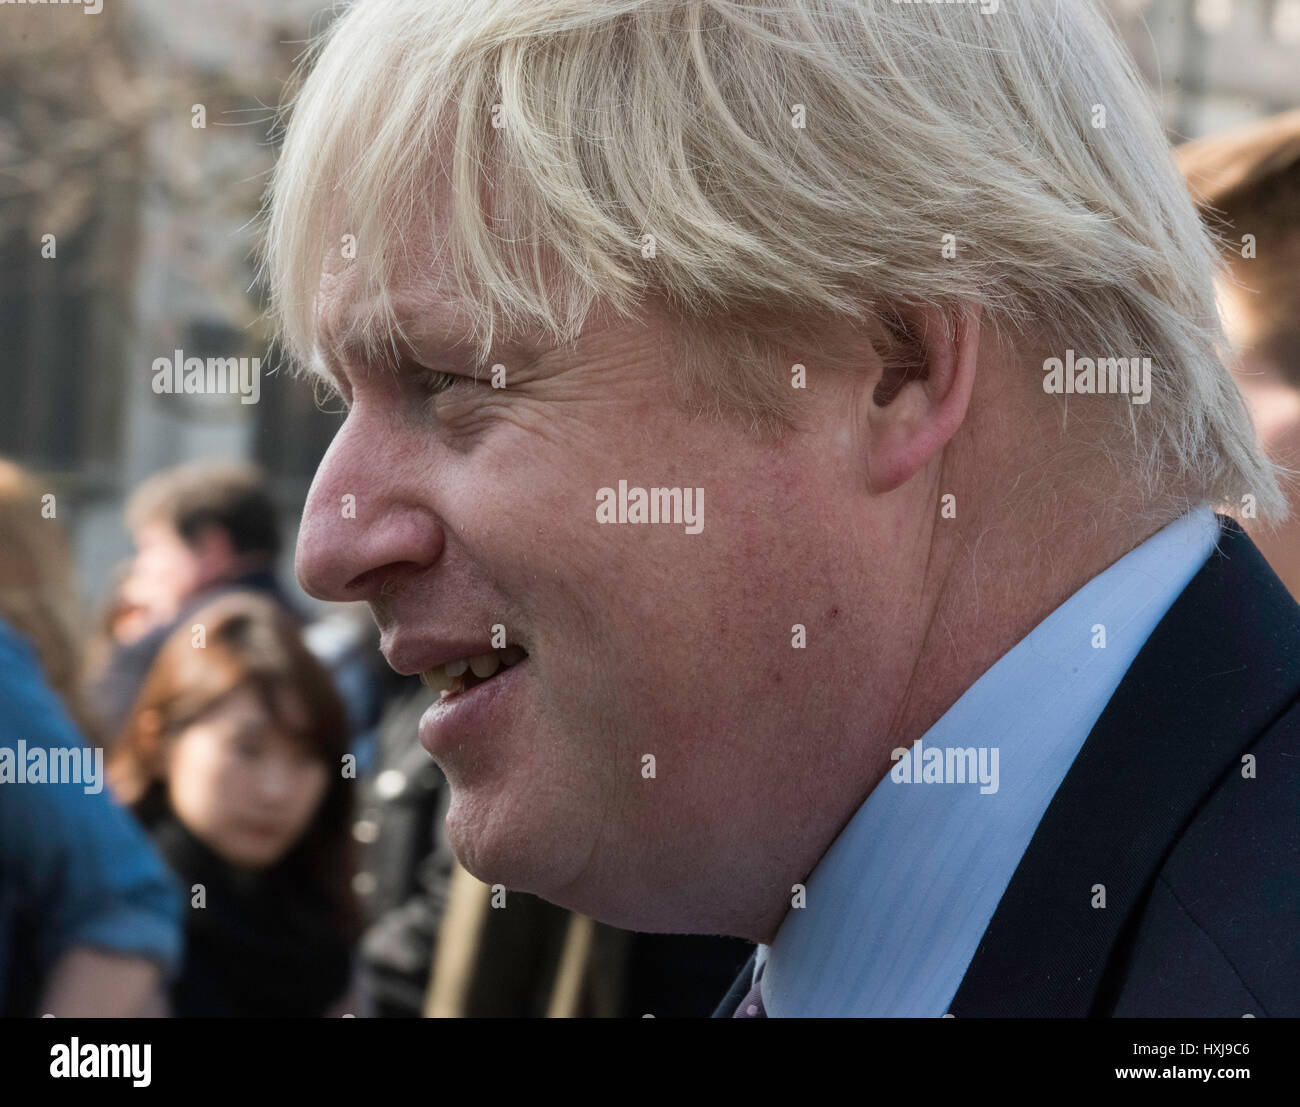 London, UK. 28th March 2017. Boris Johnson, Foreign Secretary, in a display of defiance, walks from his office to the House of Commons Credit: Ian Davidson/Alamy Live News Stock Photo